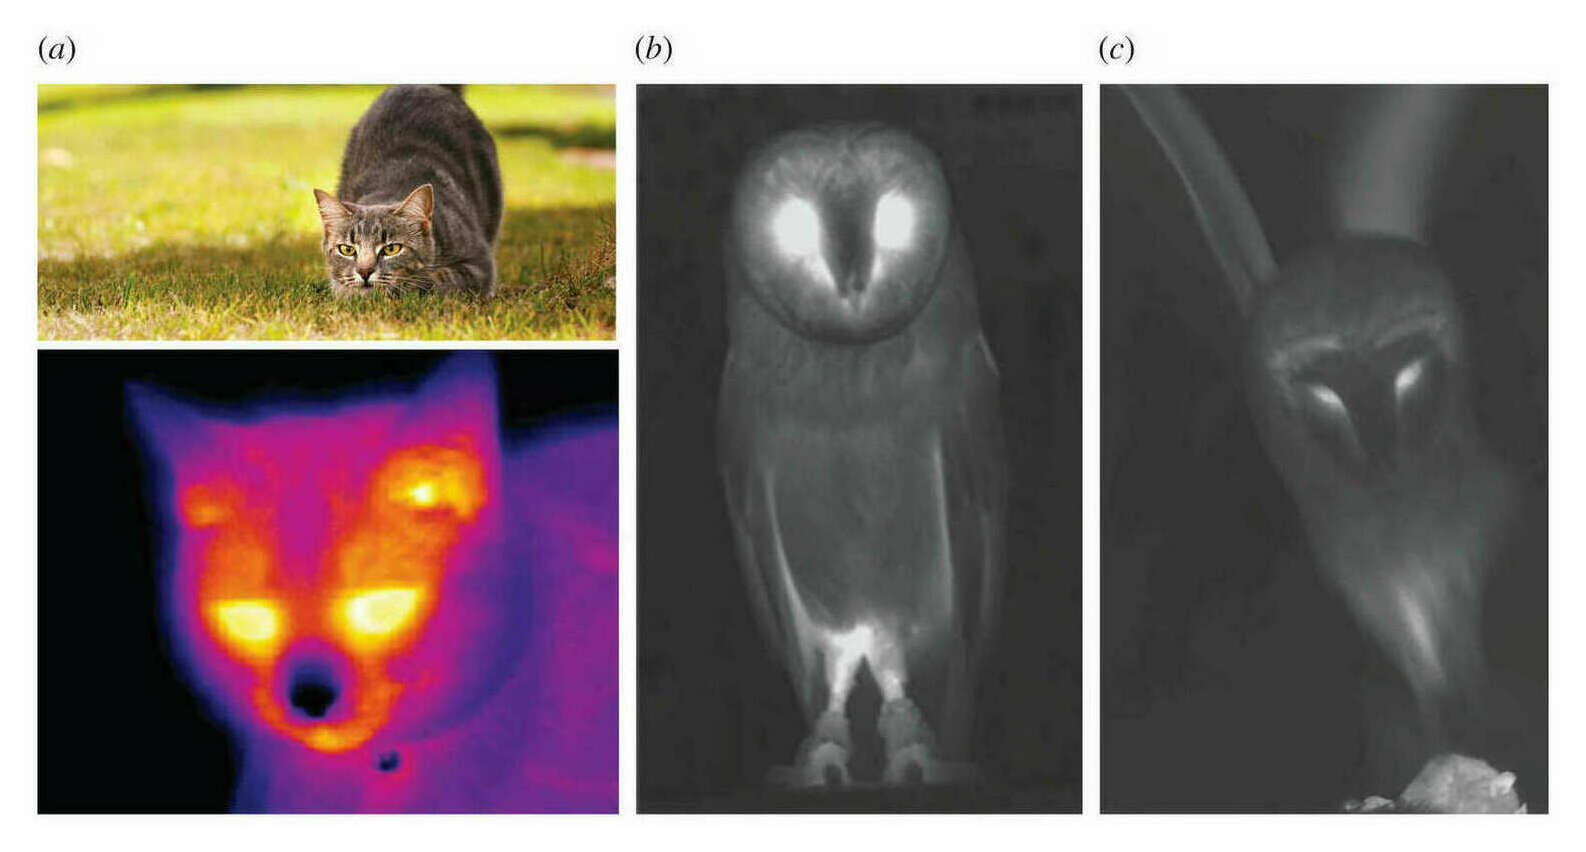 Figure 7: (a) Is a typical thermal image of a domestic cat with a characteristic cold nose that is projected towards the prey during the stalking pose; (b) illustrates the cold centre of the facial disc of a barn owl, Tyto alba, and low emission from the feathered areas in general; (c) is a late frame from a video showing a barn owl diving onto a mouse with suppressed infrared emission in the direction of the prey.